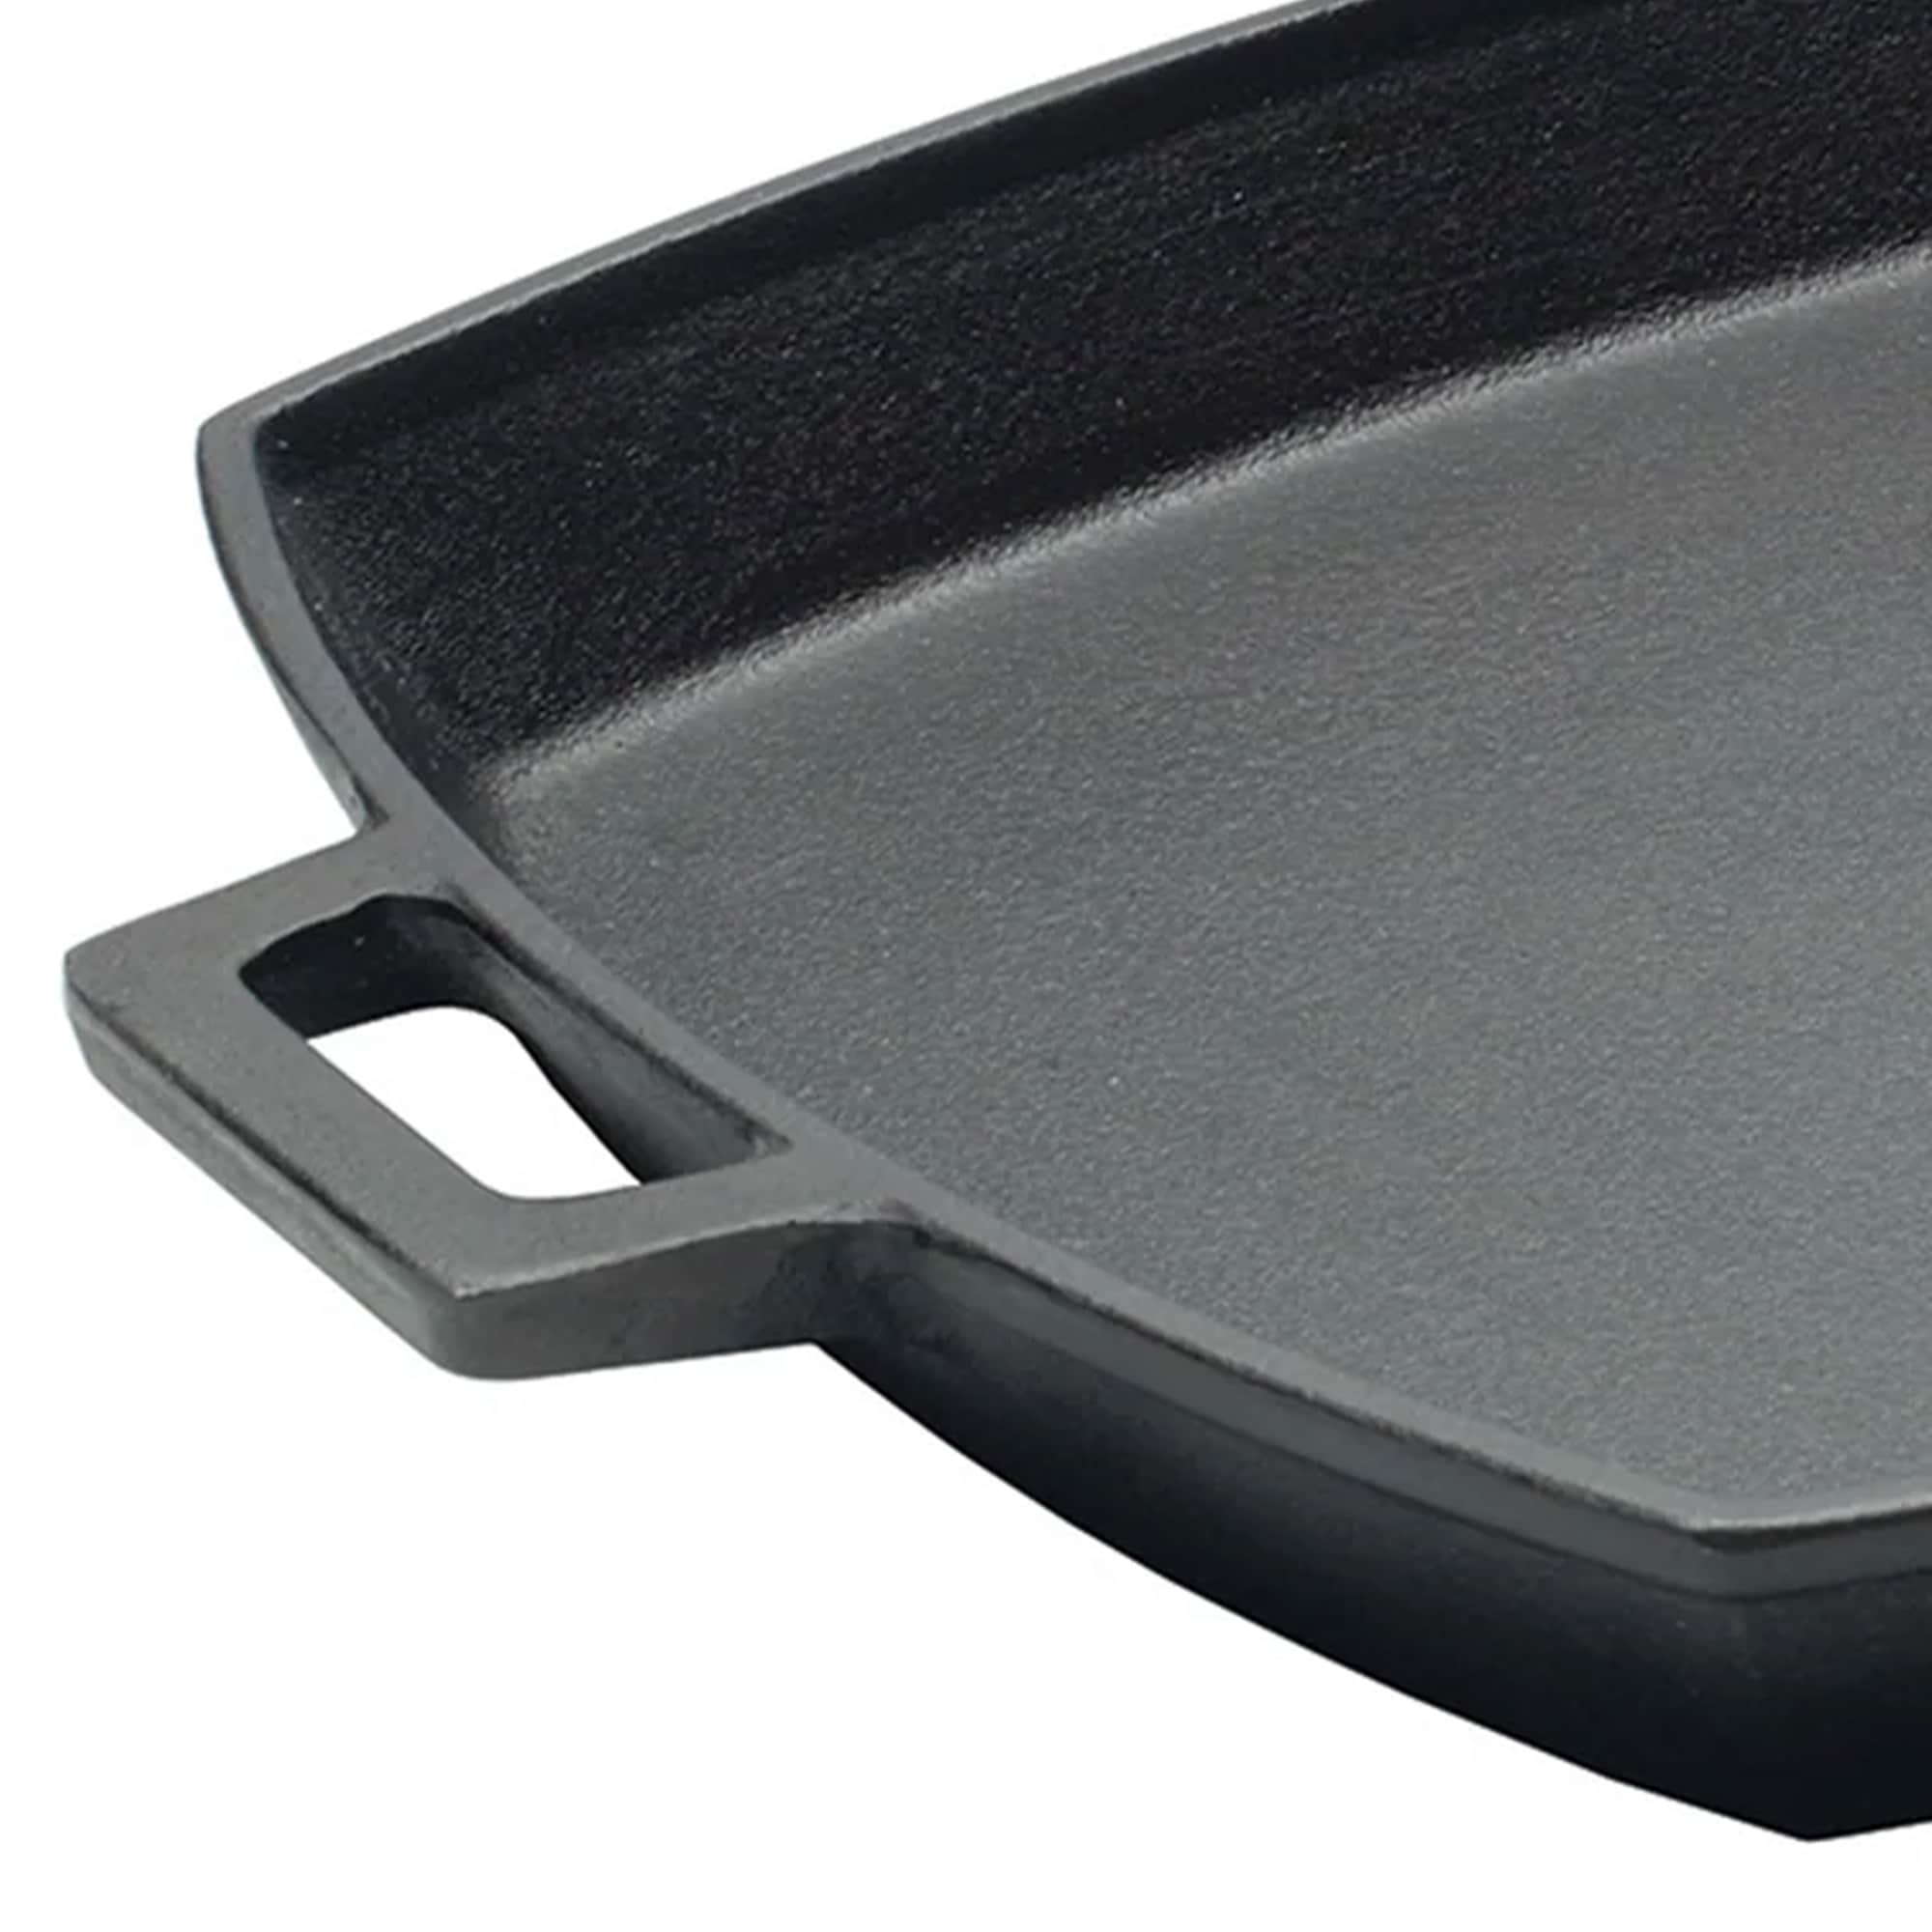 https://ak1.ostkcdn.com/images/products/is/images/direct/8c1cecf541ae0bd9ae04aabec780a175dd368116/Bayou-Classic-12-x-14-Inch-Cast-Iron-Shallow-Pan-with-Wide-Loop-Handles%2C-Black.jpg